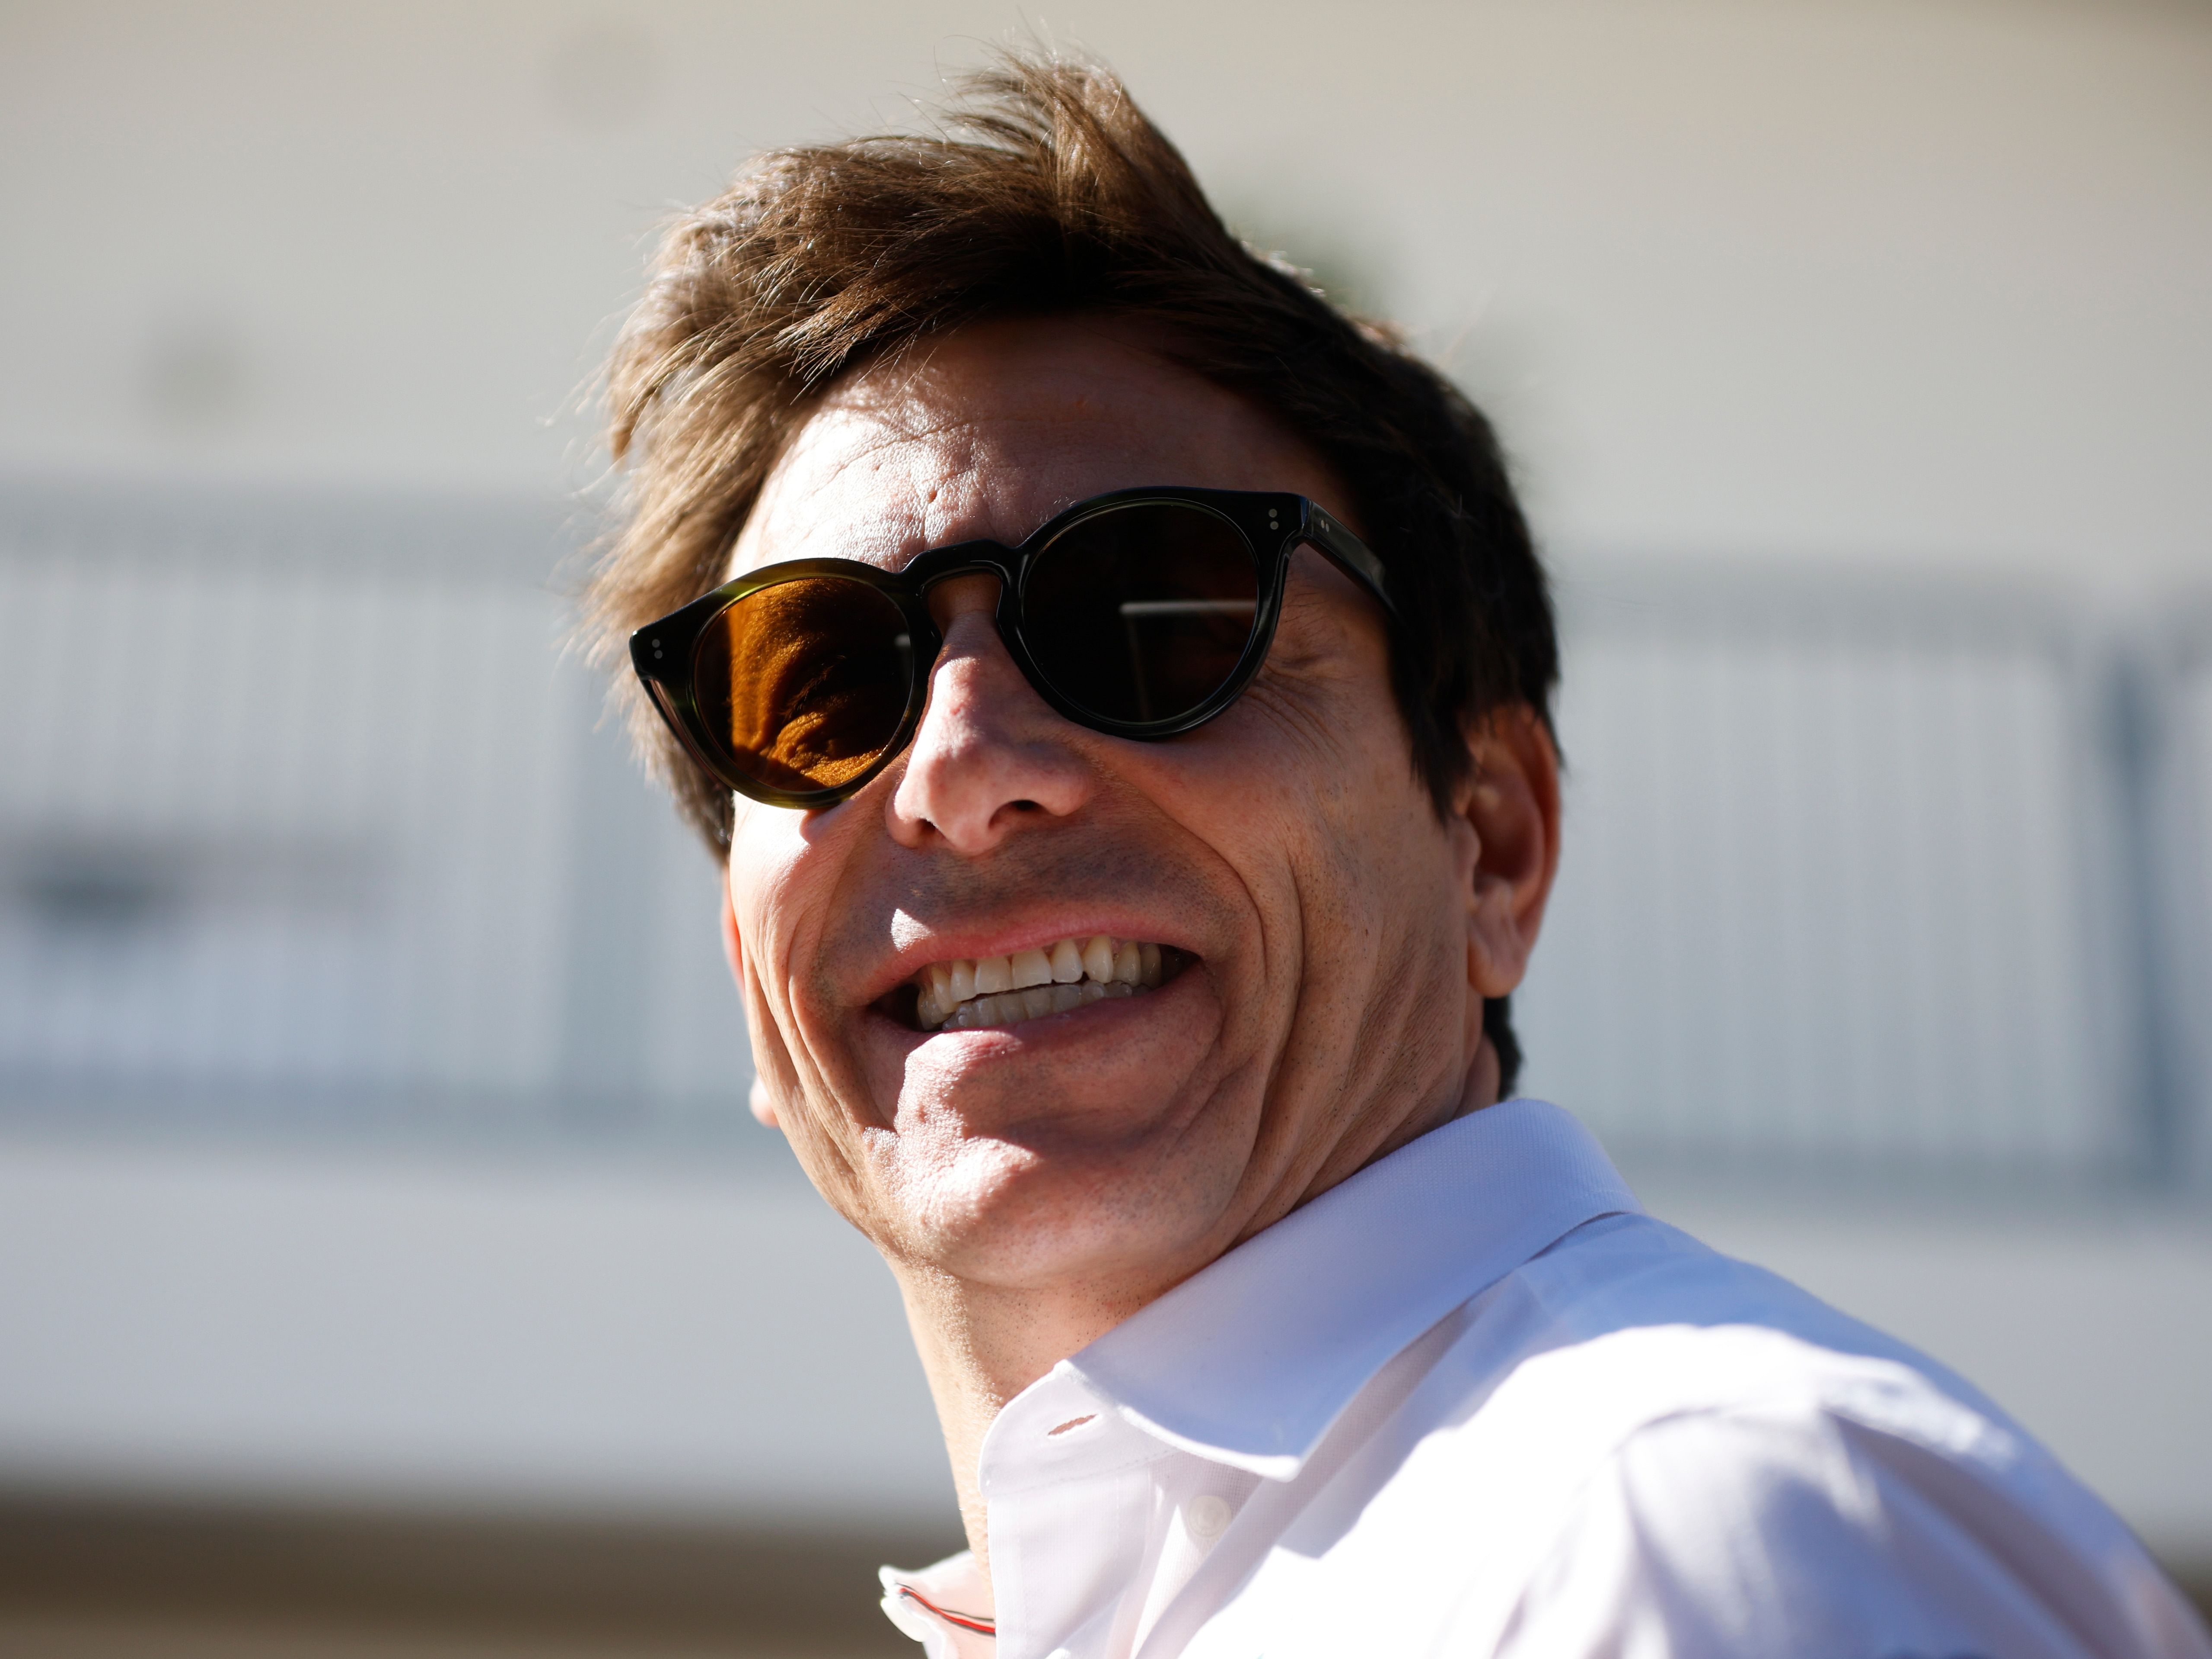 Mercedes GP Executive Director Toto Wolff in the paddock prior to practice ahead of the 2022 F1 USA Grand Prix (Photo by Jared C. Tilton/Getty Images)